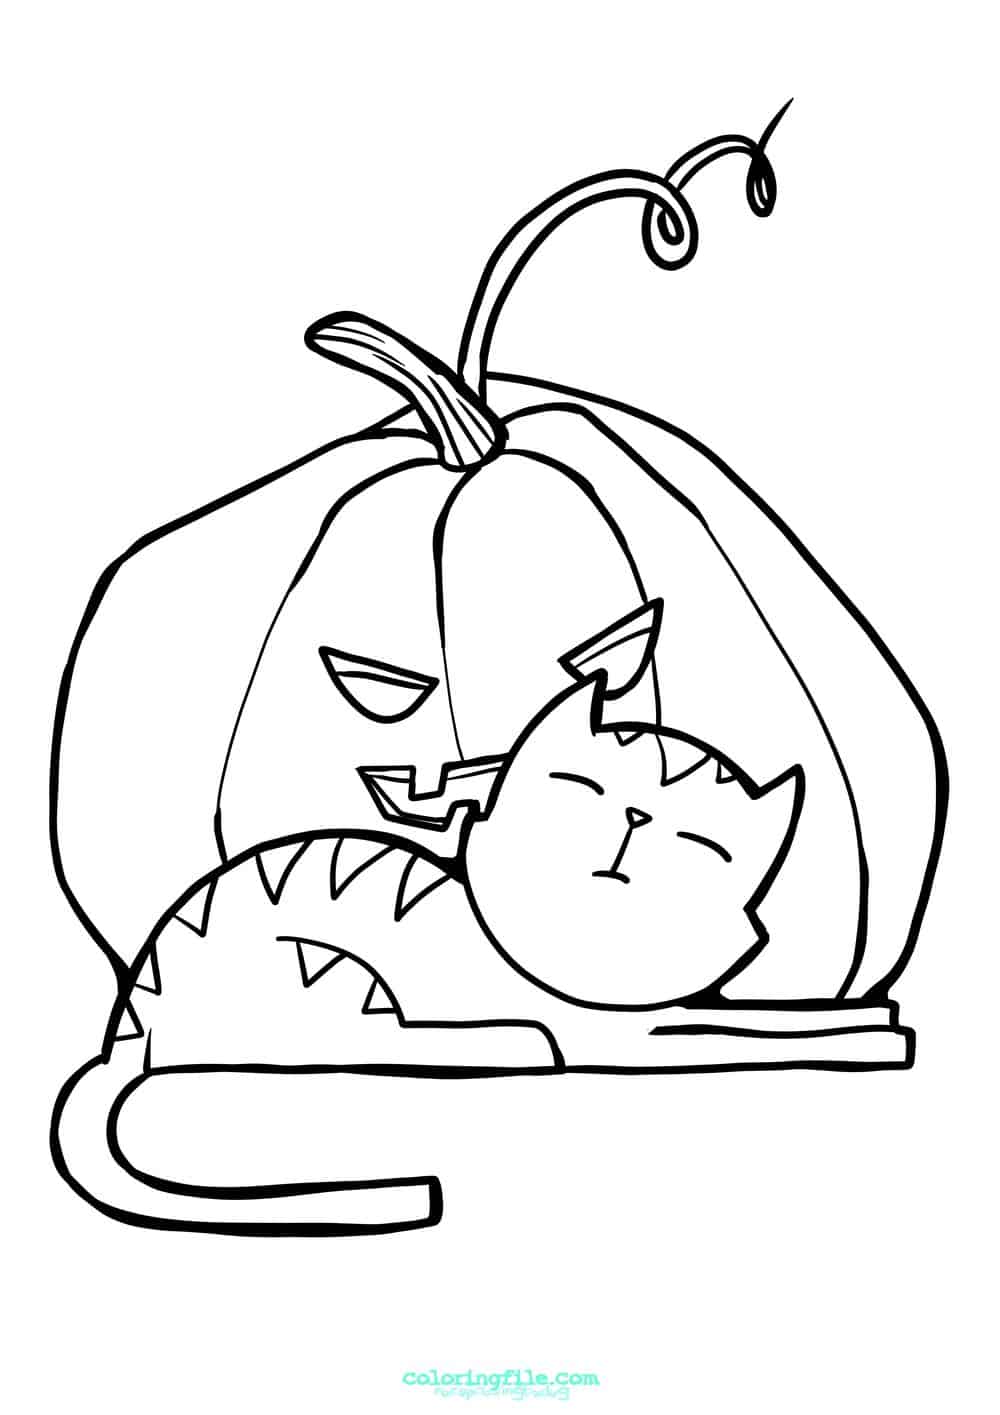 Halloween cat cuddling pumpkin coloring pages